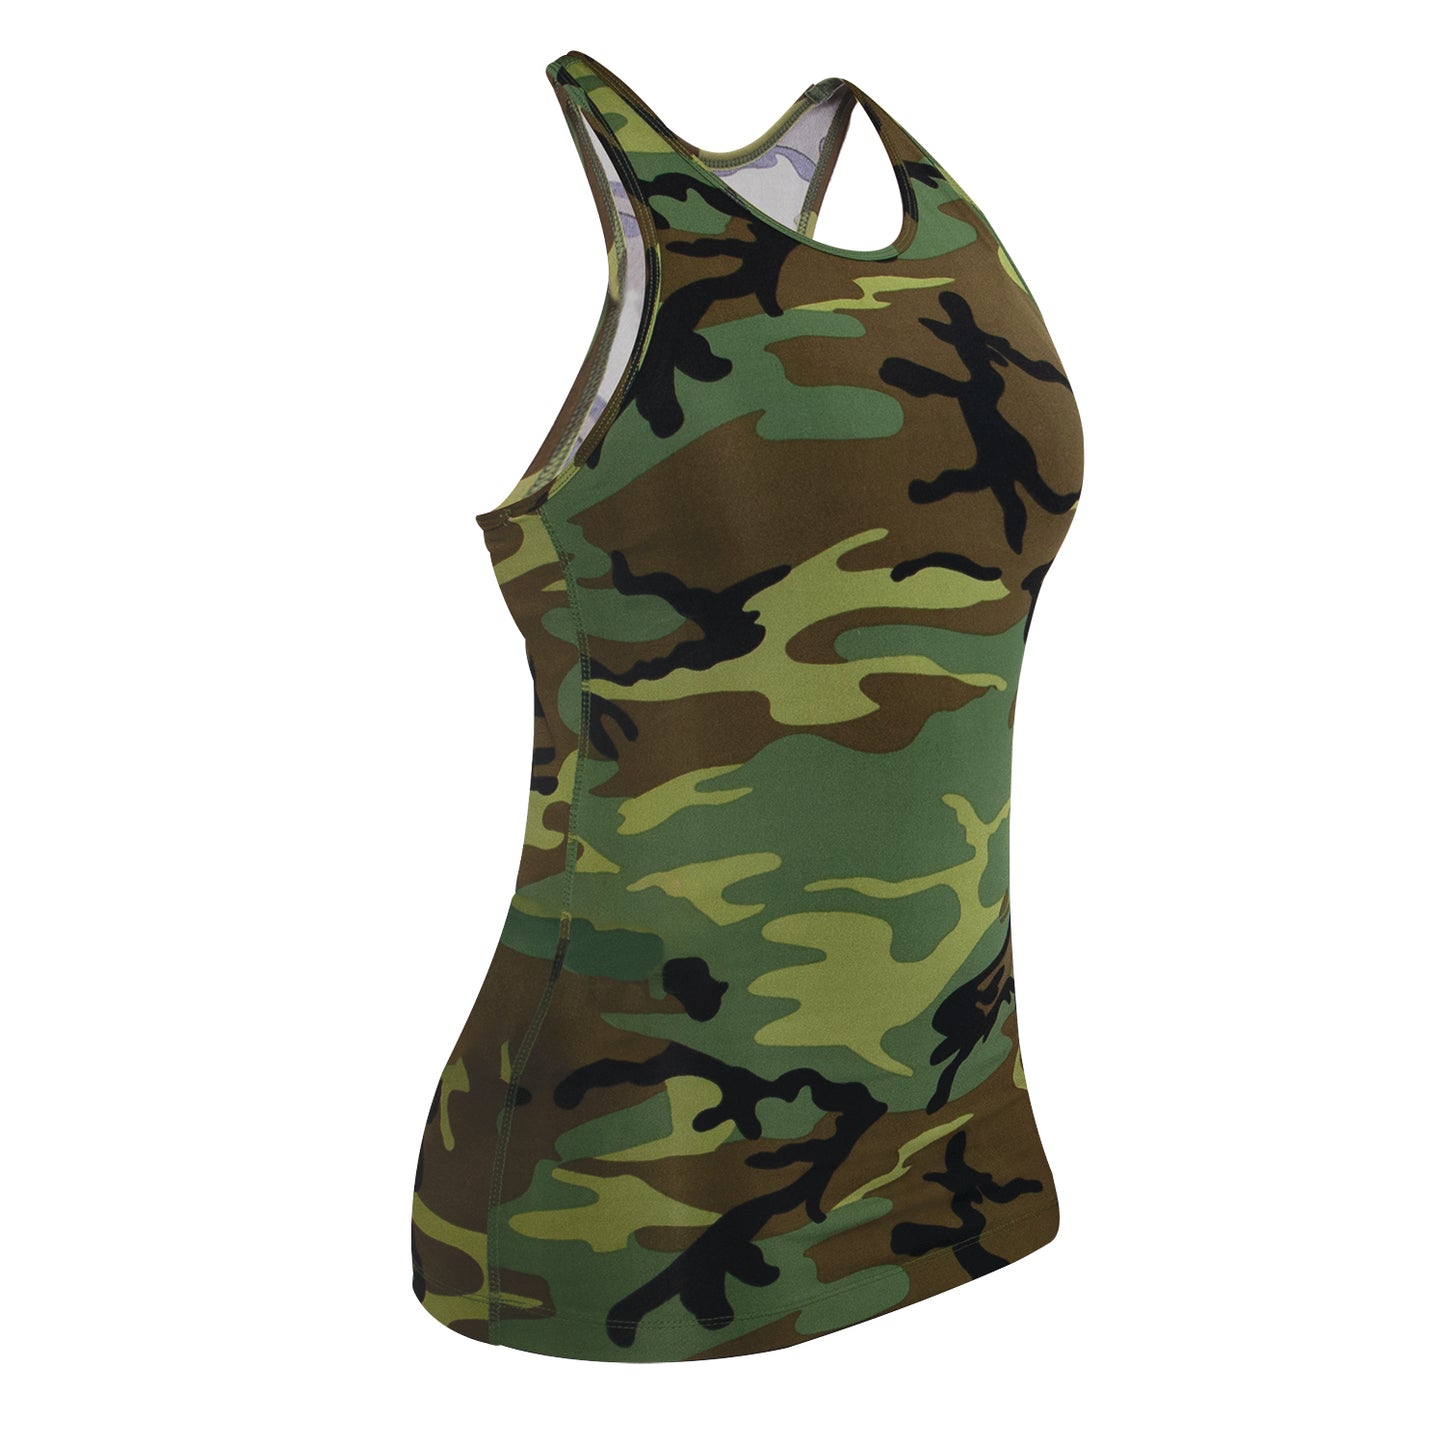 Womens Camouflage Performance Tank Top - Ladies Athletic Training Camo T-Shirt